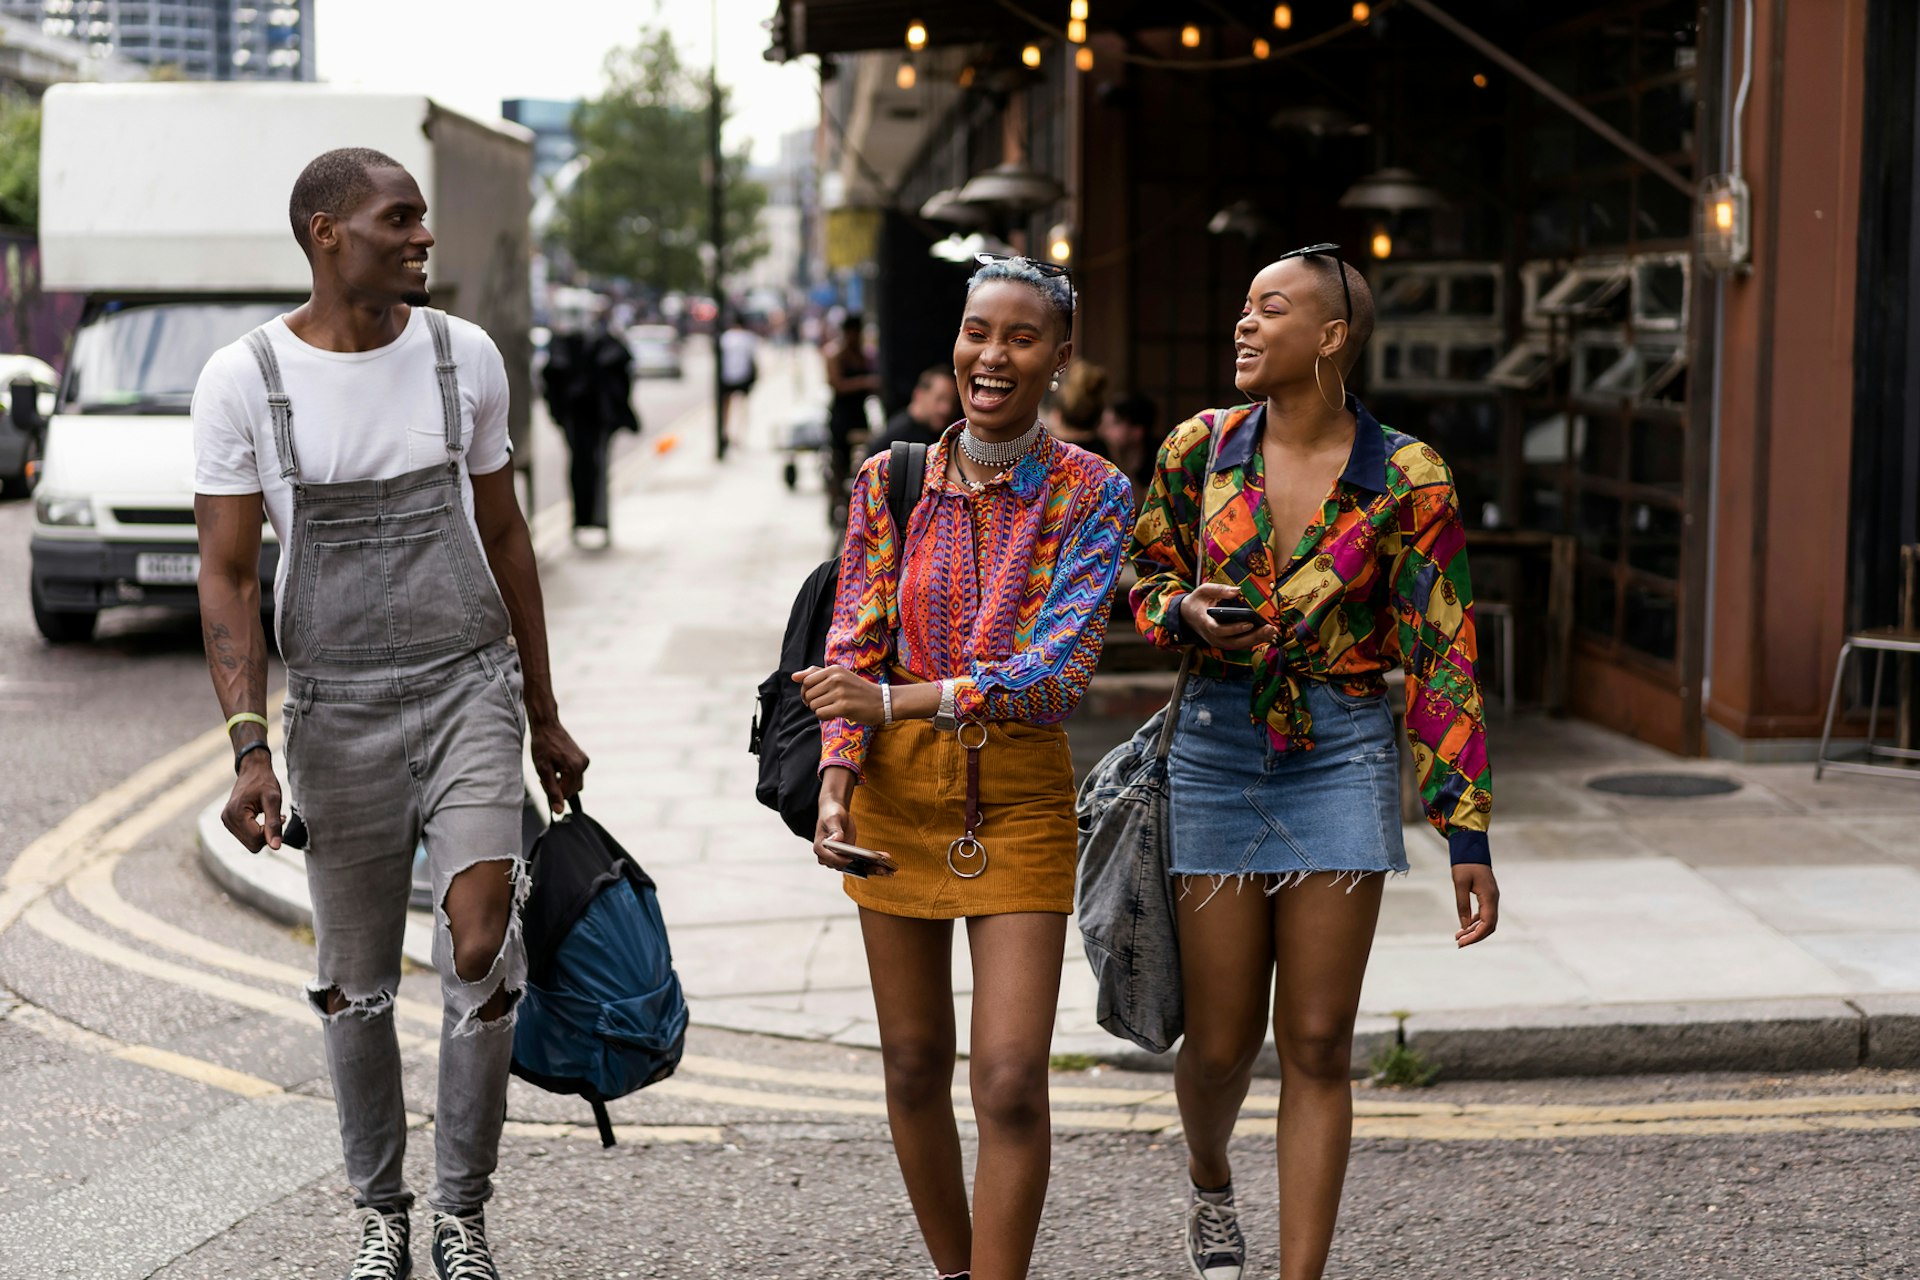 Two women and one man walk along a London street together while smiling and laughing